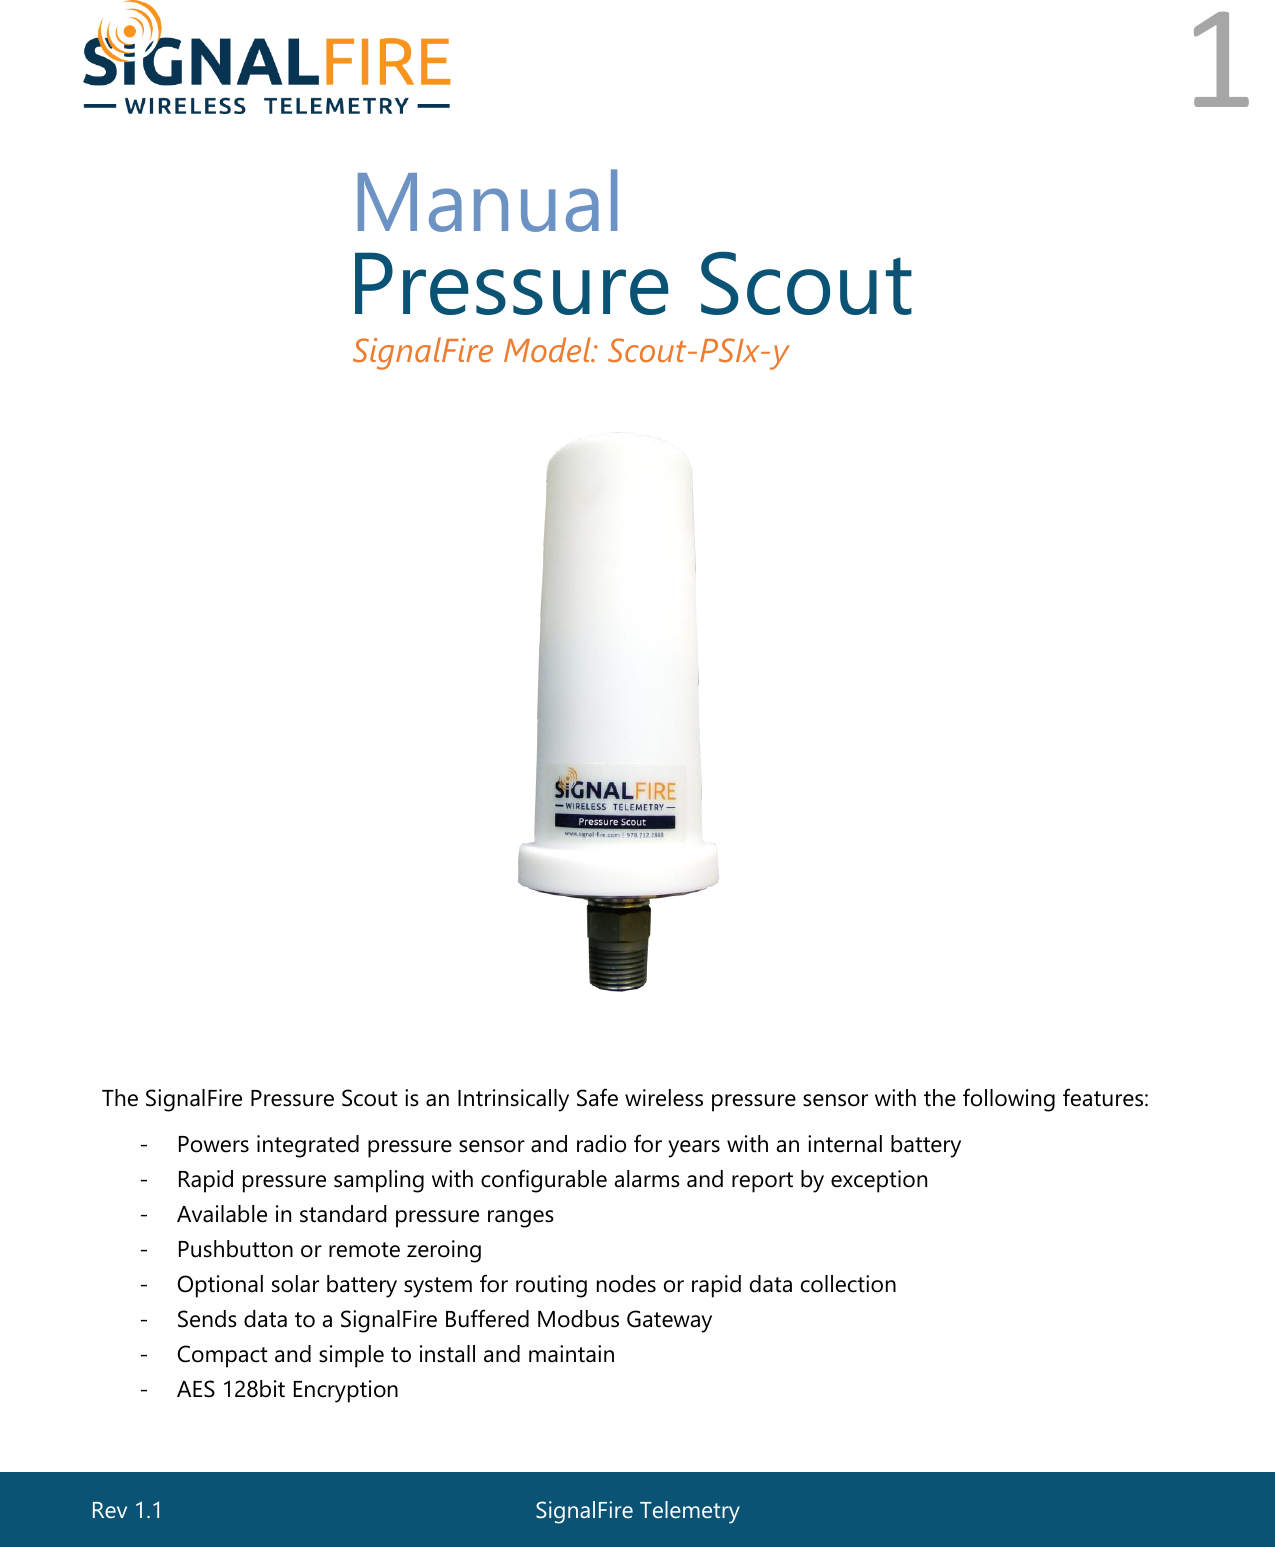  1       Manual  Pressure Scout  SignalFire Model: Scout-PSIx-y     The SignalFire Pressure Scout is an Intrinsically Safe wireless pressure sensor with the following features: - Powers integrated pressure sensor and radio for years with an internal battery - Rapid pressure sampling with configurable alarms and report by exception - Available in standard pressure ranges - Pushbutton or remote zeroing - Optional solar battery system for routing nodes or rapid data collection - Sends data to a SignalFire Buffered Modbus Gateway - Compact and simple to install and maintain - AES 128bit Encryption  SignalFire Telemetry Rev 1.1 